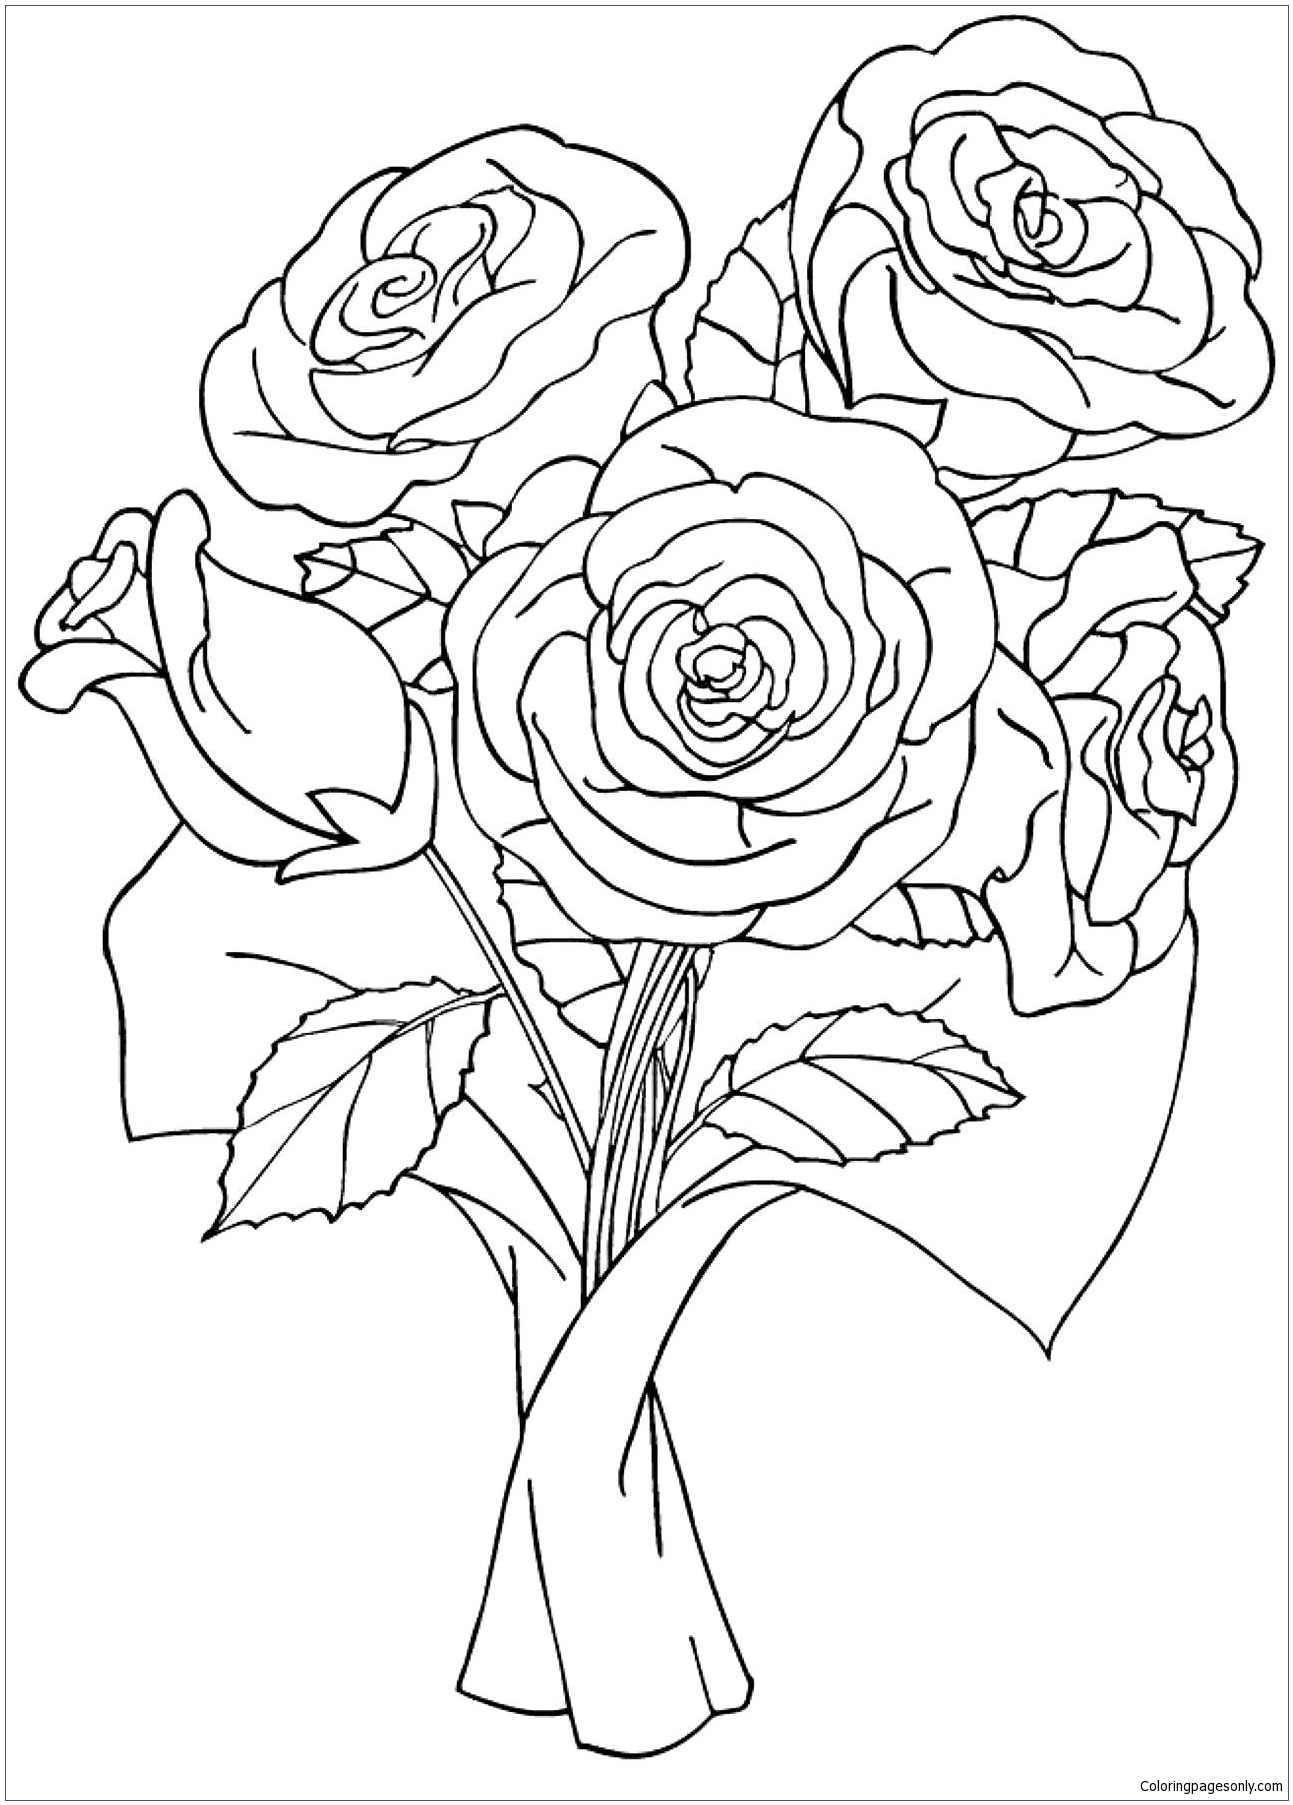 free-printable-rose-coloring-pages-printable-word-searches